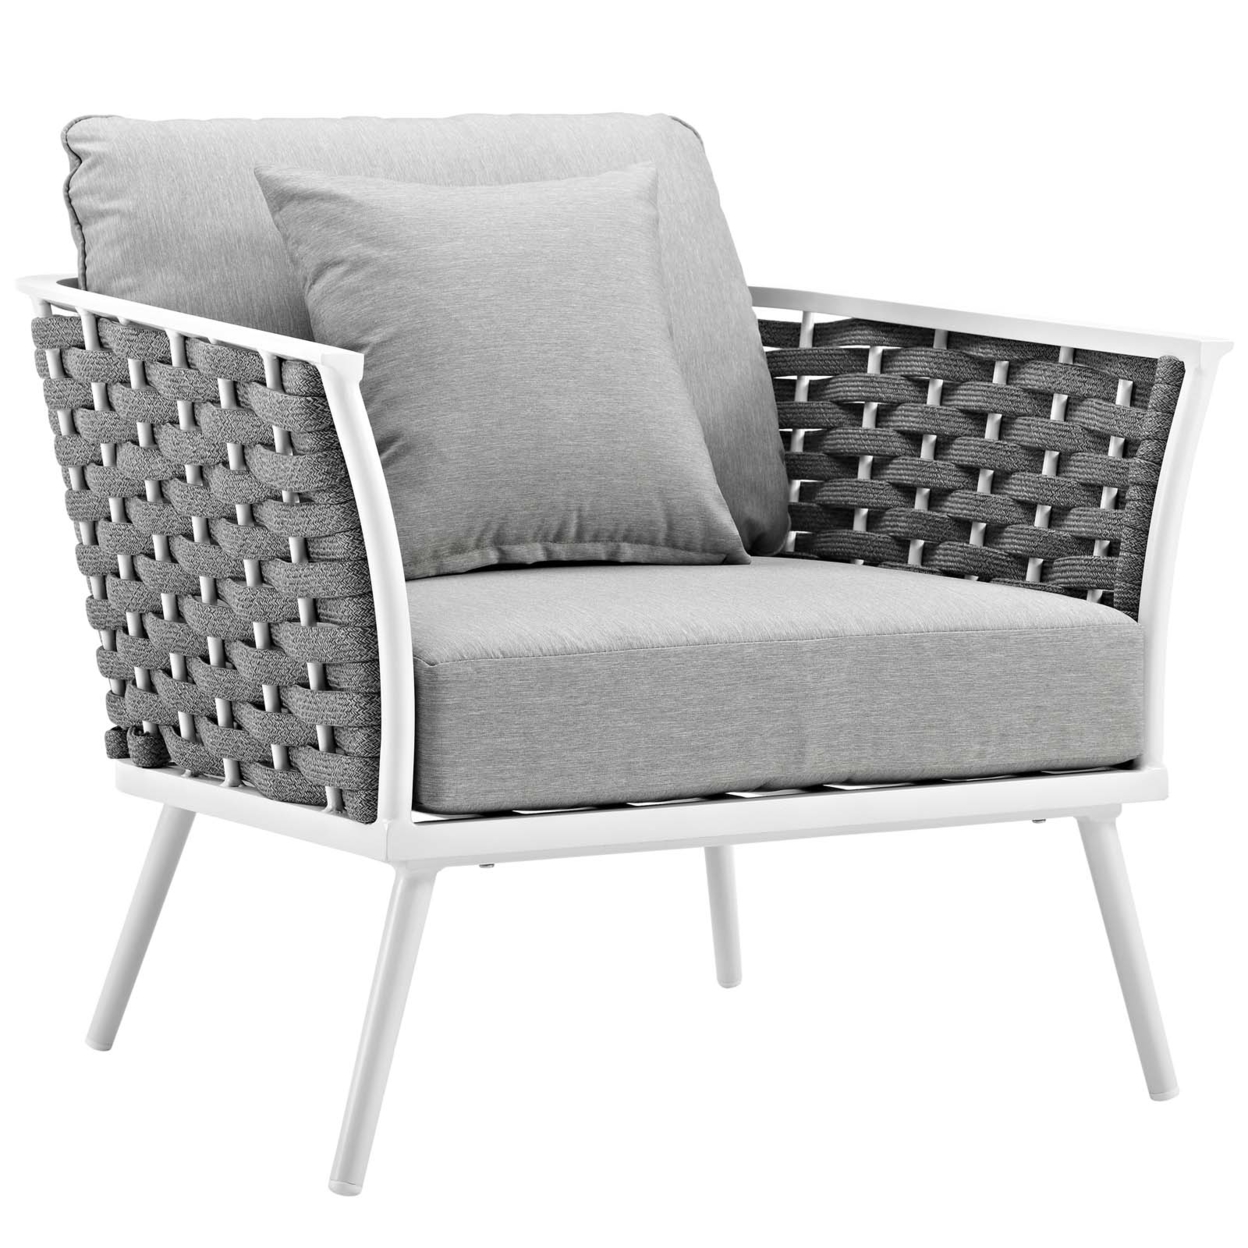 Stance Outdoor Patio Aluminum Armchair (3054-WHI-GRY)